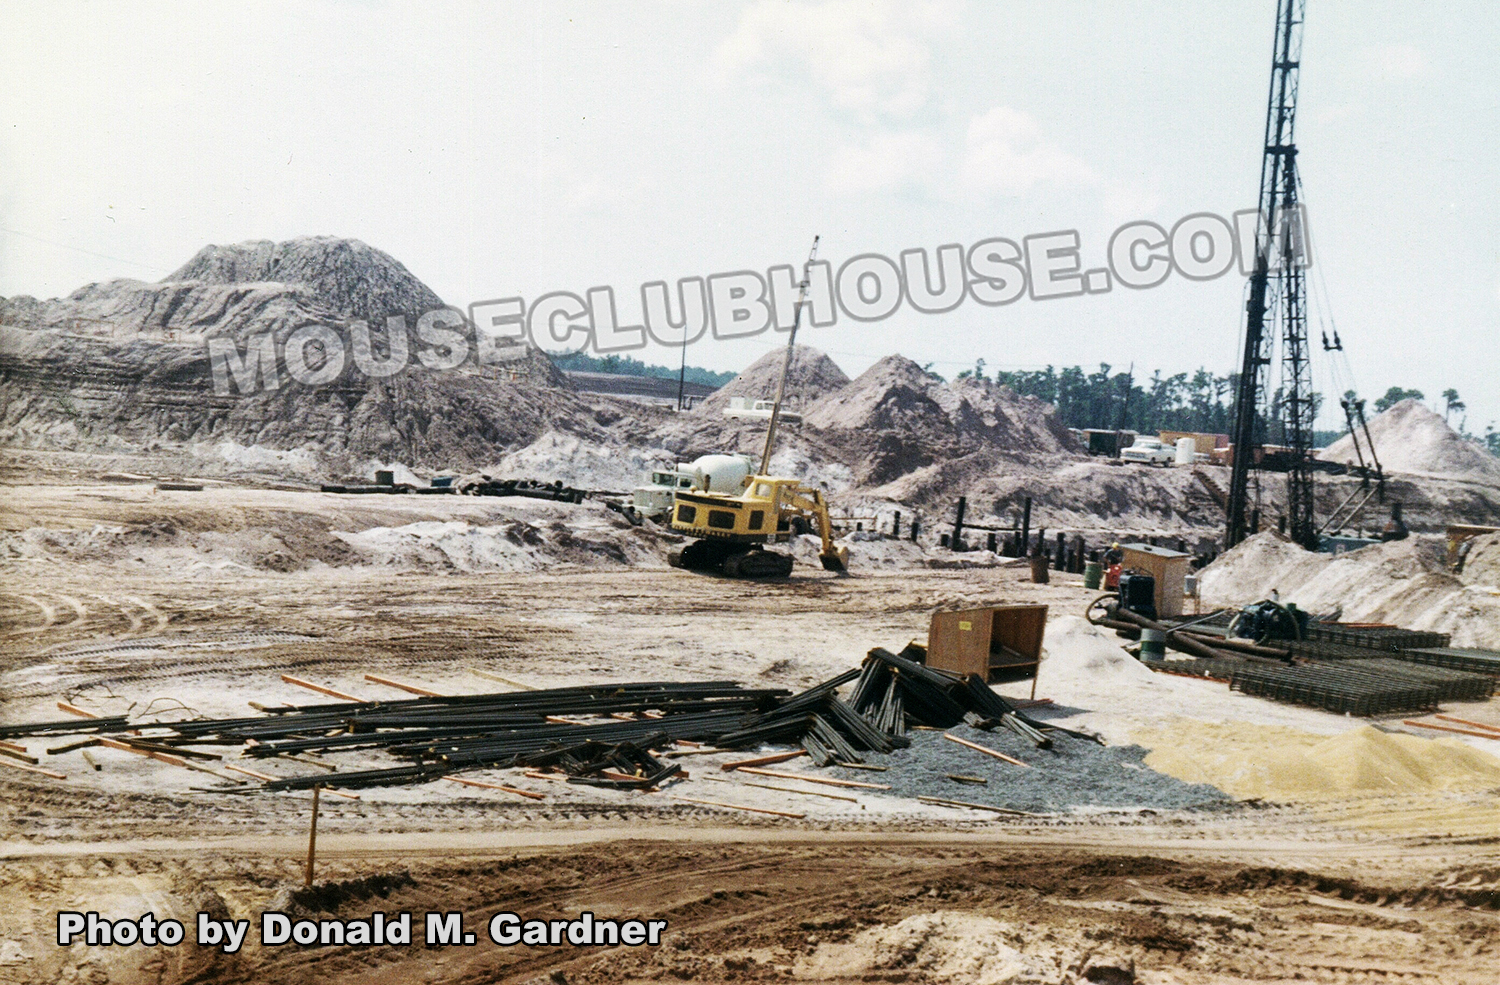 Construction on the "basement" which Fantasyland sits atop